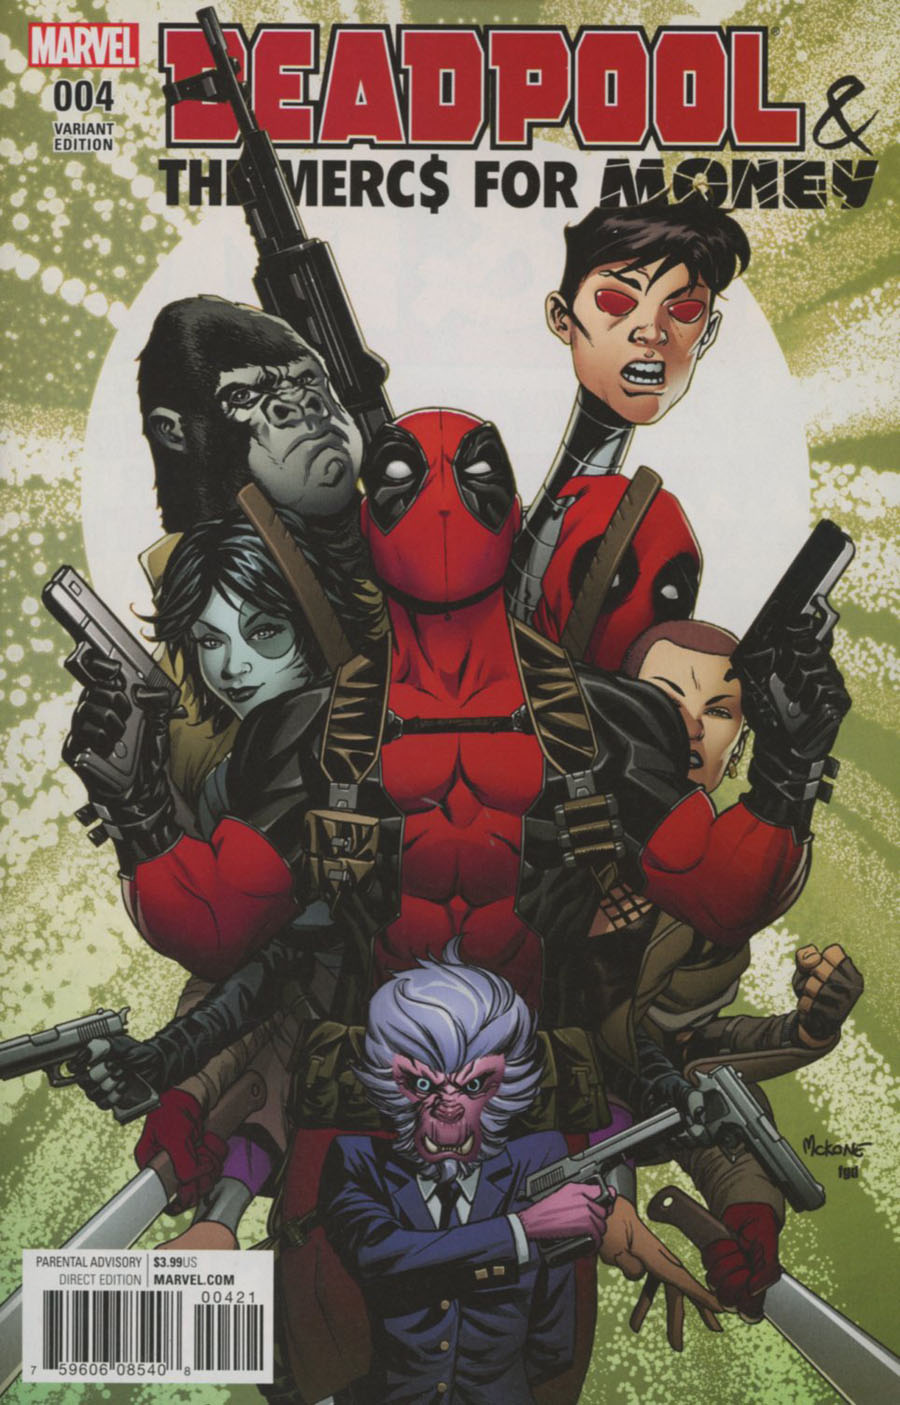 Deadpool And The Mercs For Money Vol 2 #4 Cover B Variant Mike McKone Cover (Marvel Now Tie-In)